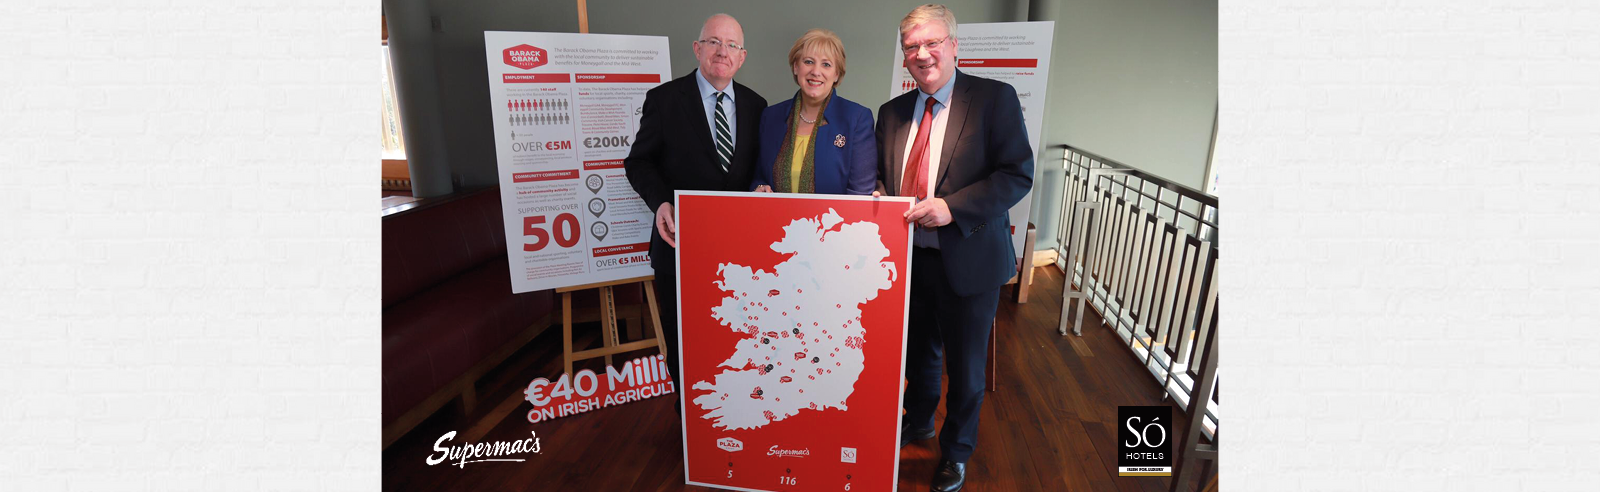 300 New Jobs Created by the Supermac’s and SÓ Hotels Groups